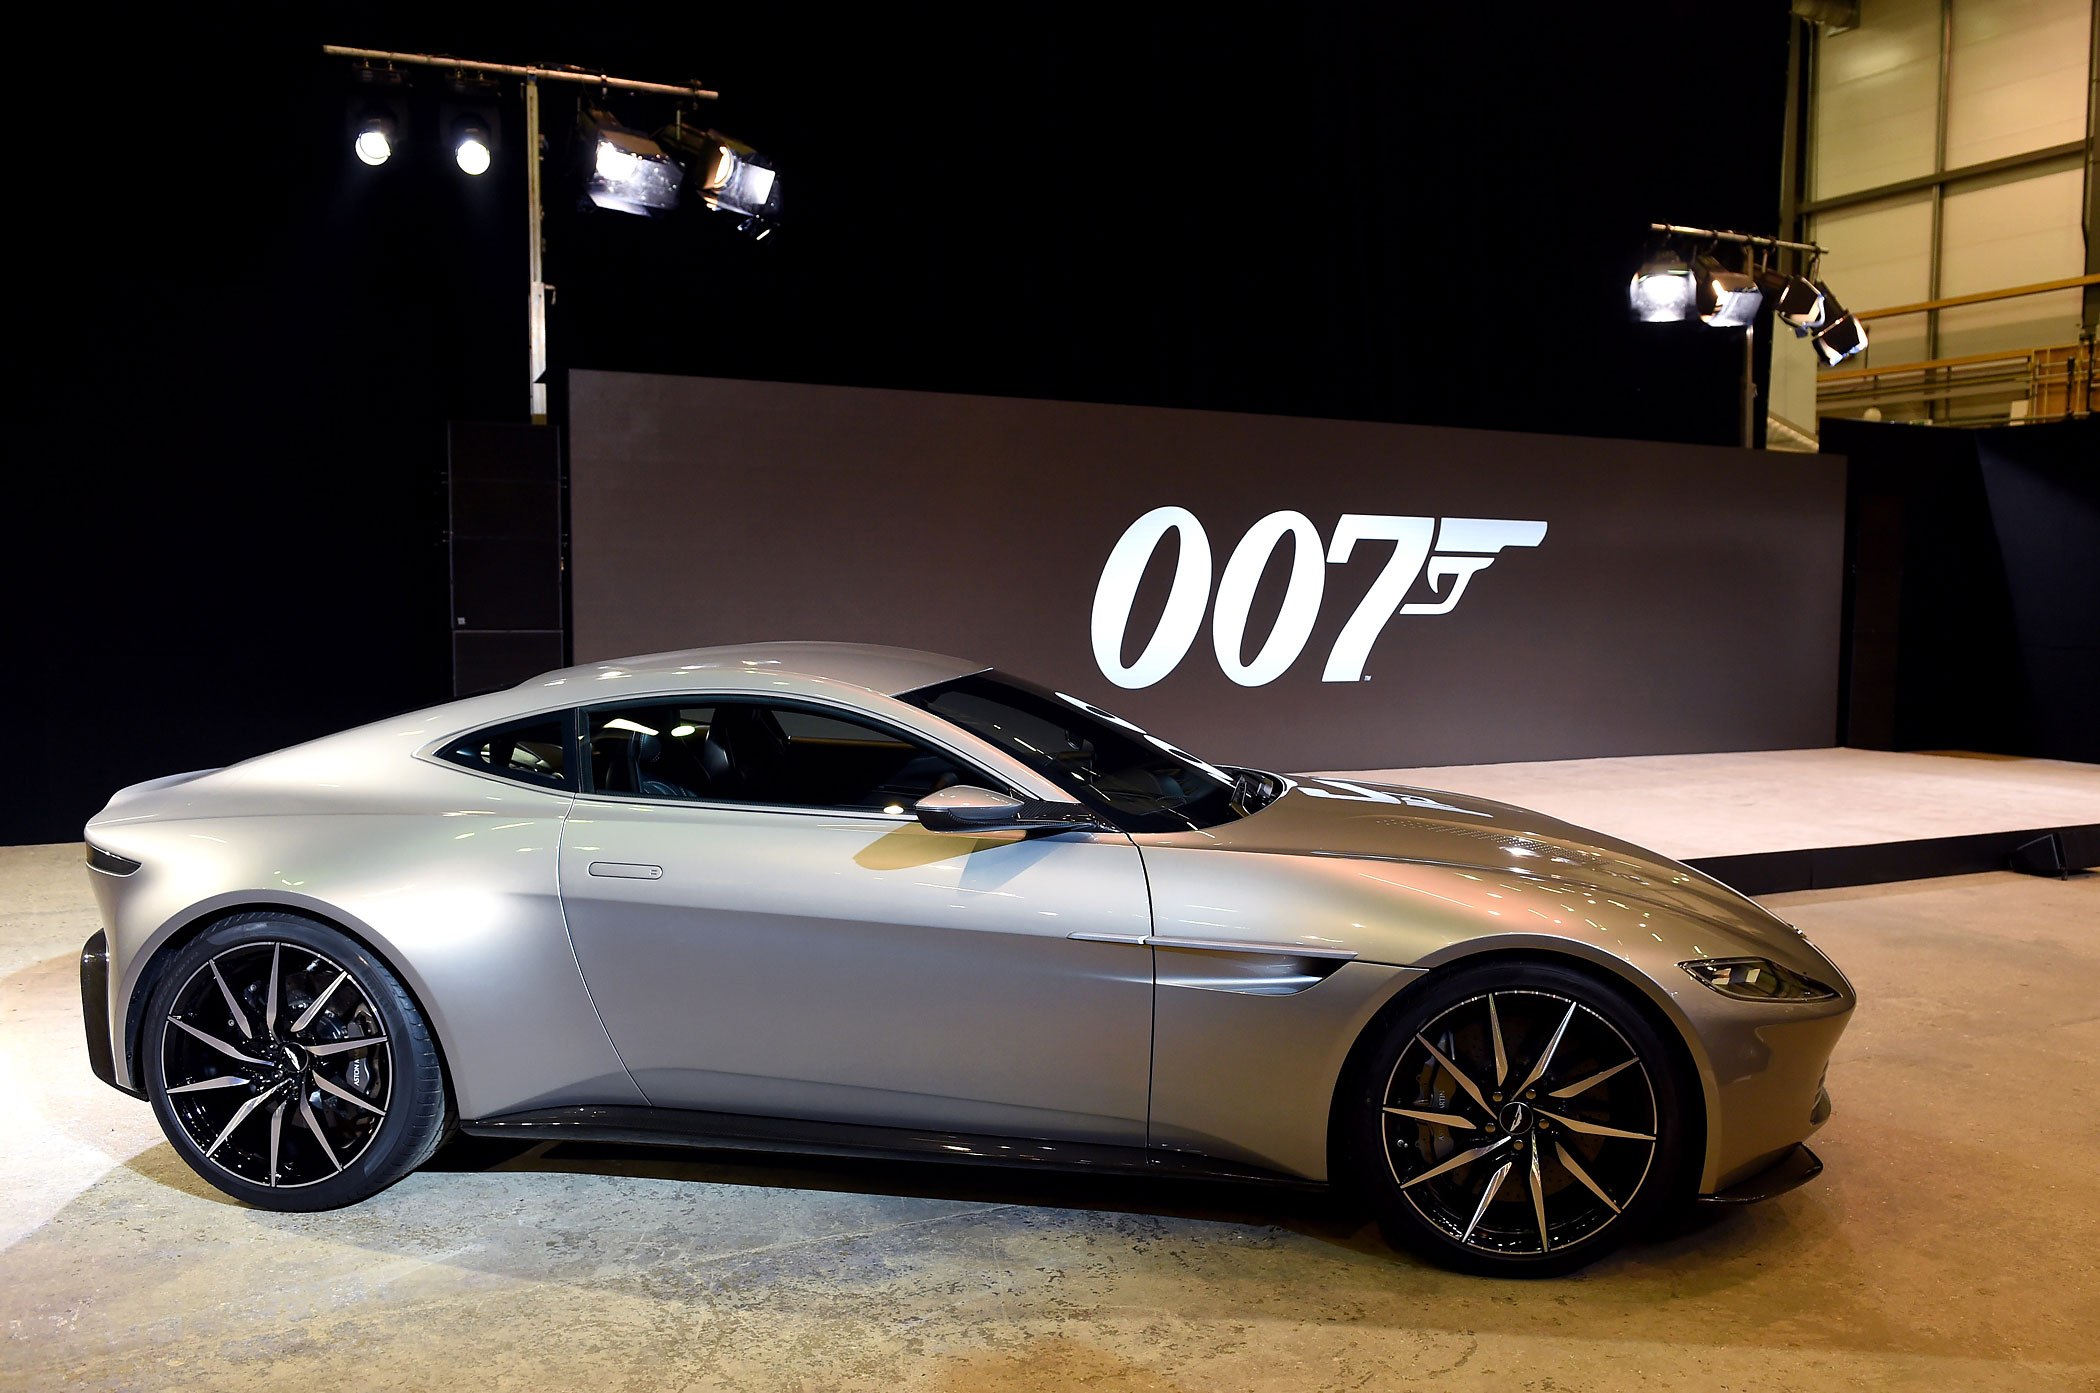 The new Aston Martin DB10 is displayed at Pinewood Studios during the announcement of the new James Bond film <i>Spectre</i> on December 4, 2014 in Iver Heath, England. (Karwai Tang—WireImage/Getty Images)